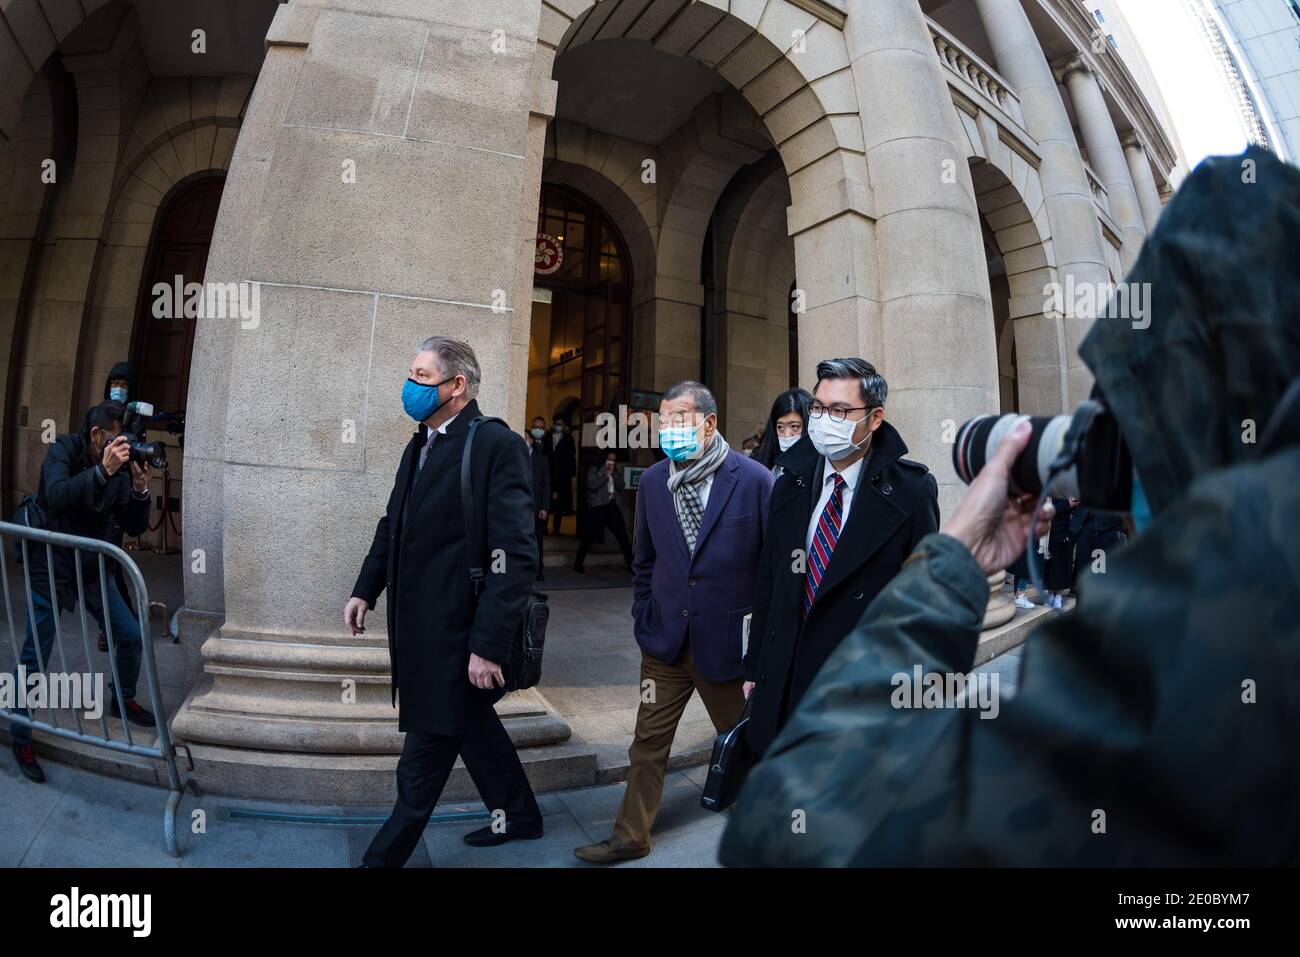 Hong Kong, China. 31st Dec, 2020. Media Mogul Jimmy Lai exits the Court of Final Appeal accompanied by his lawyers after an urgent hearing requested by the Department of Justice on his bail conditions. Jimmy Lai was charged with National Security Law breaches and was granted bail before Christmas. His bail was revoked by the Court at 4 pm on 31st December 2020. Credit: Marc R. Fernandes/Alamy Live News Stock Photo